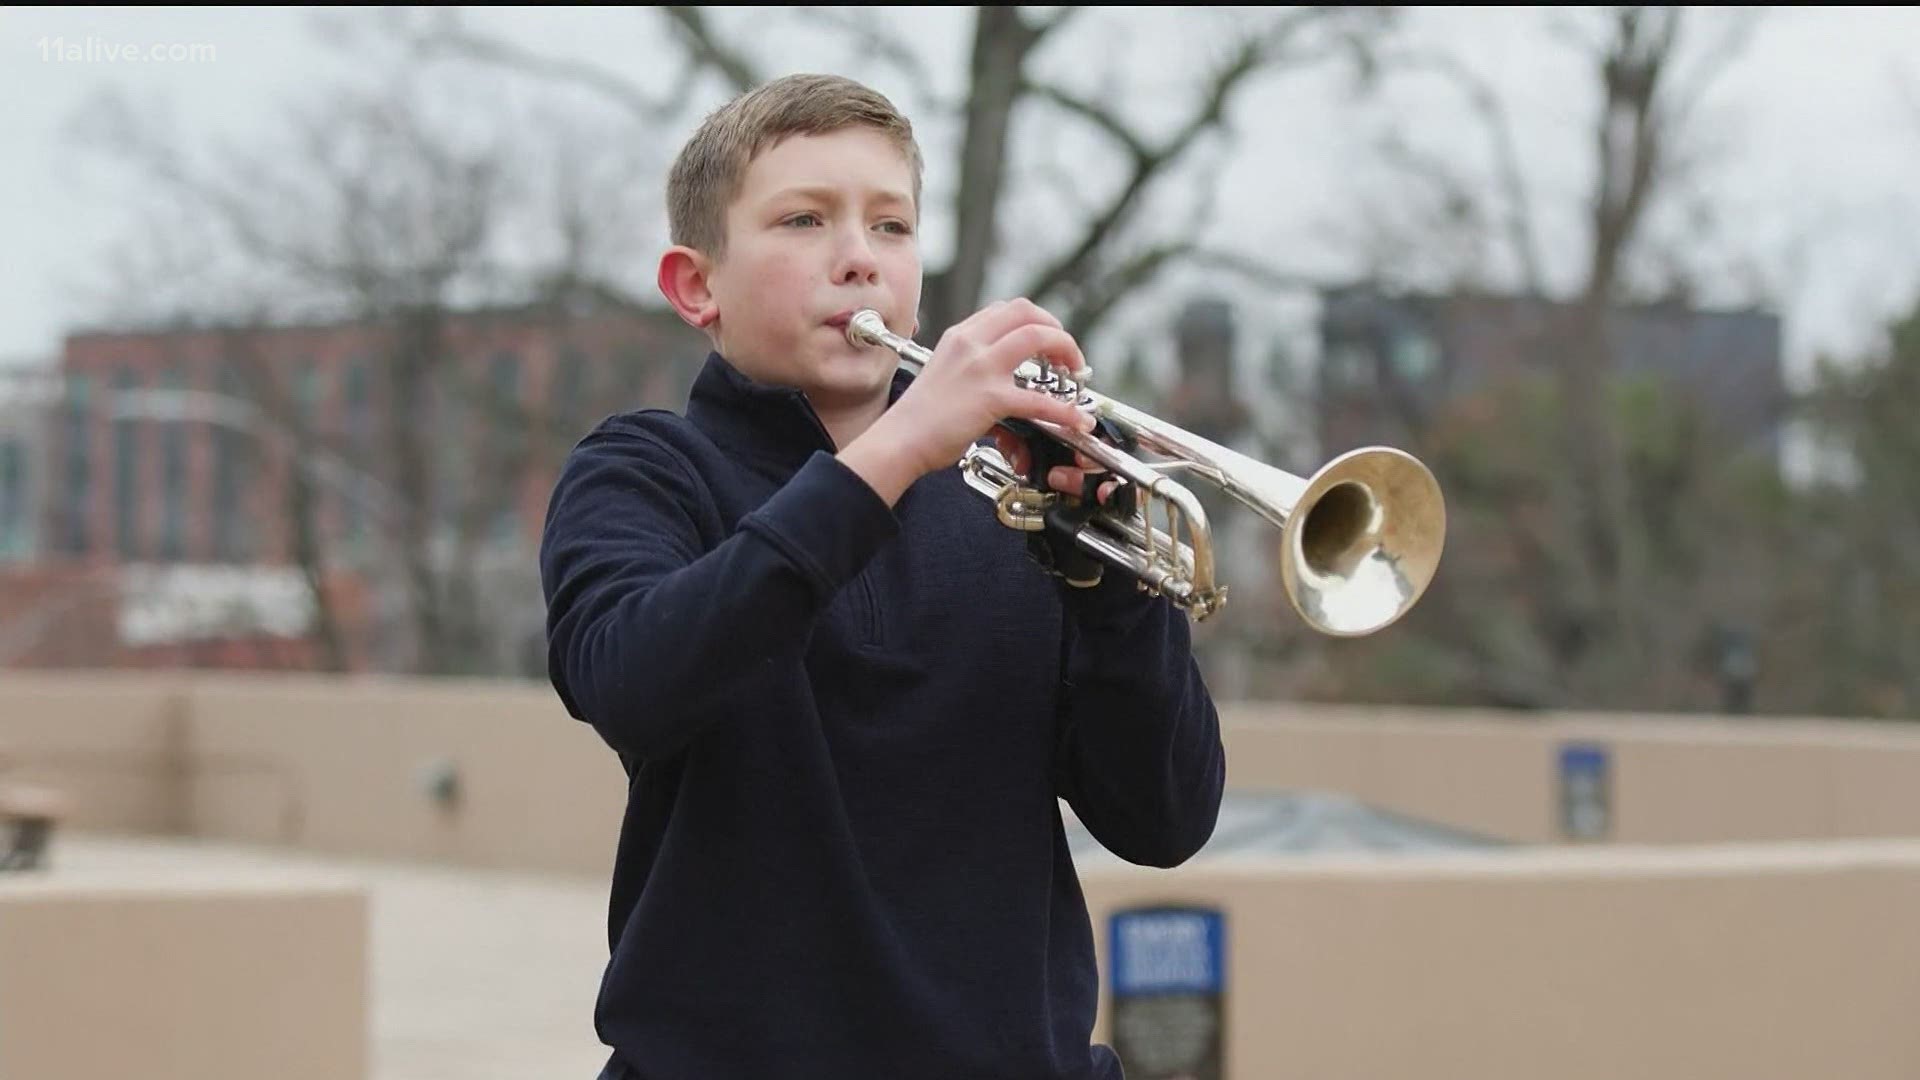 A 12-year-old Atlanta trumpet player was highlighted during today's inauguration parade as one of America’s heroes in the community.